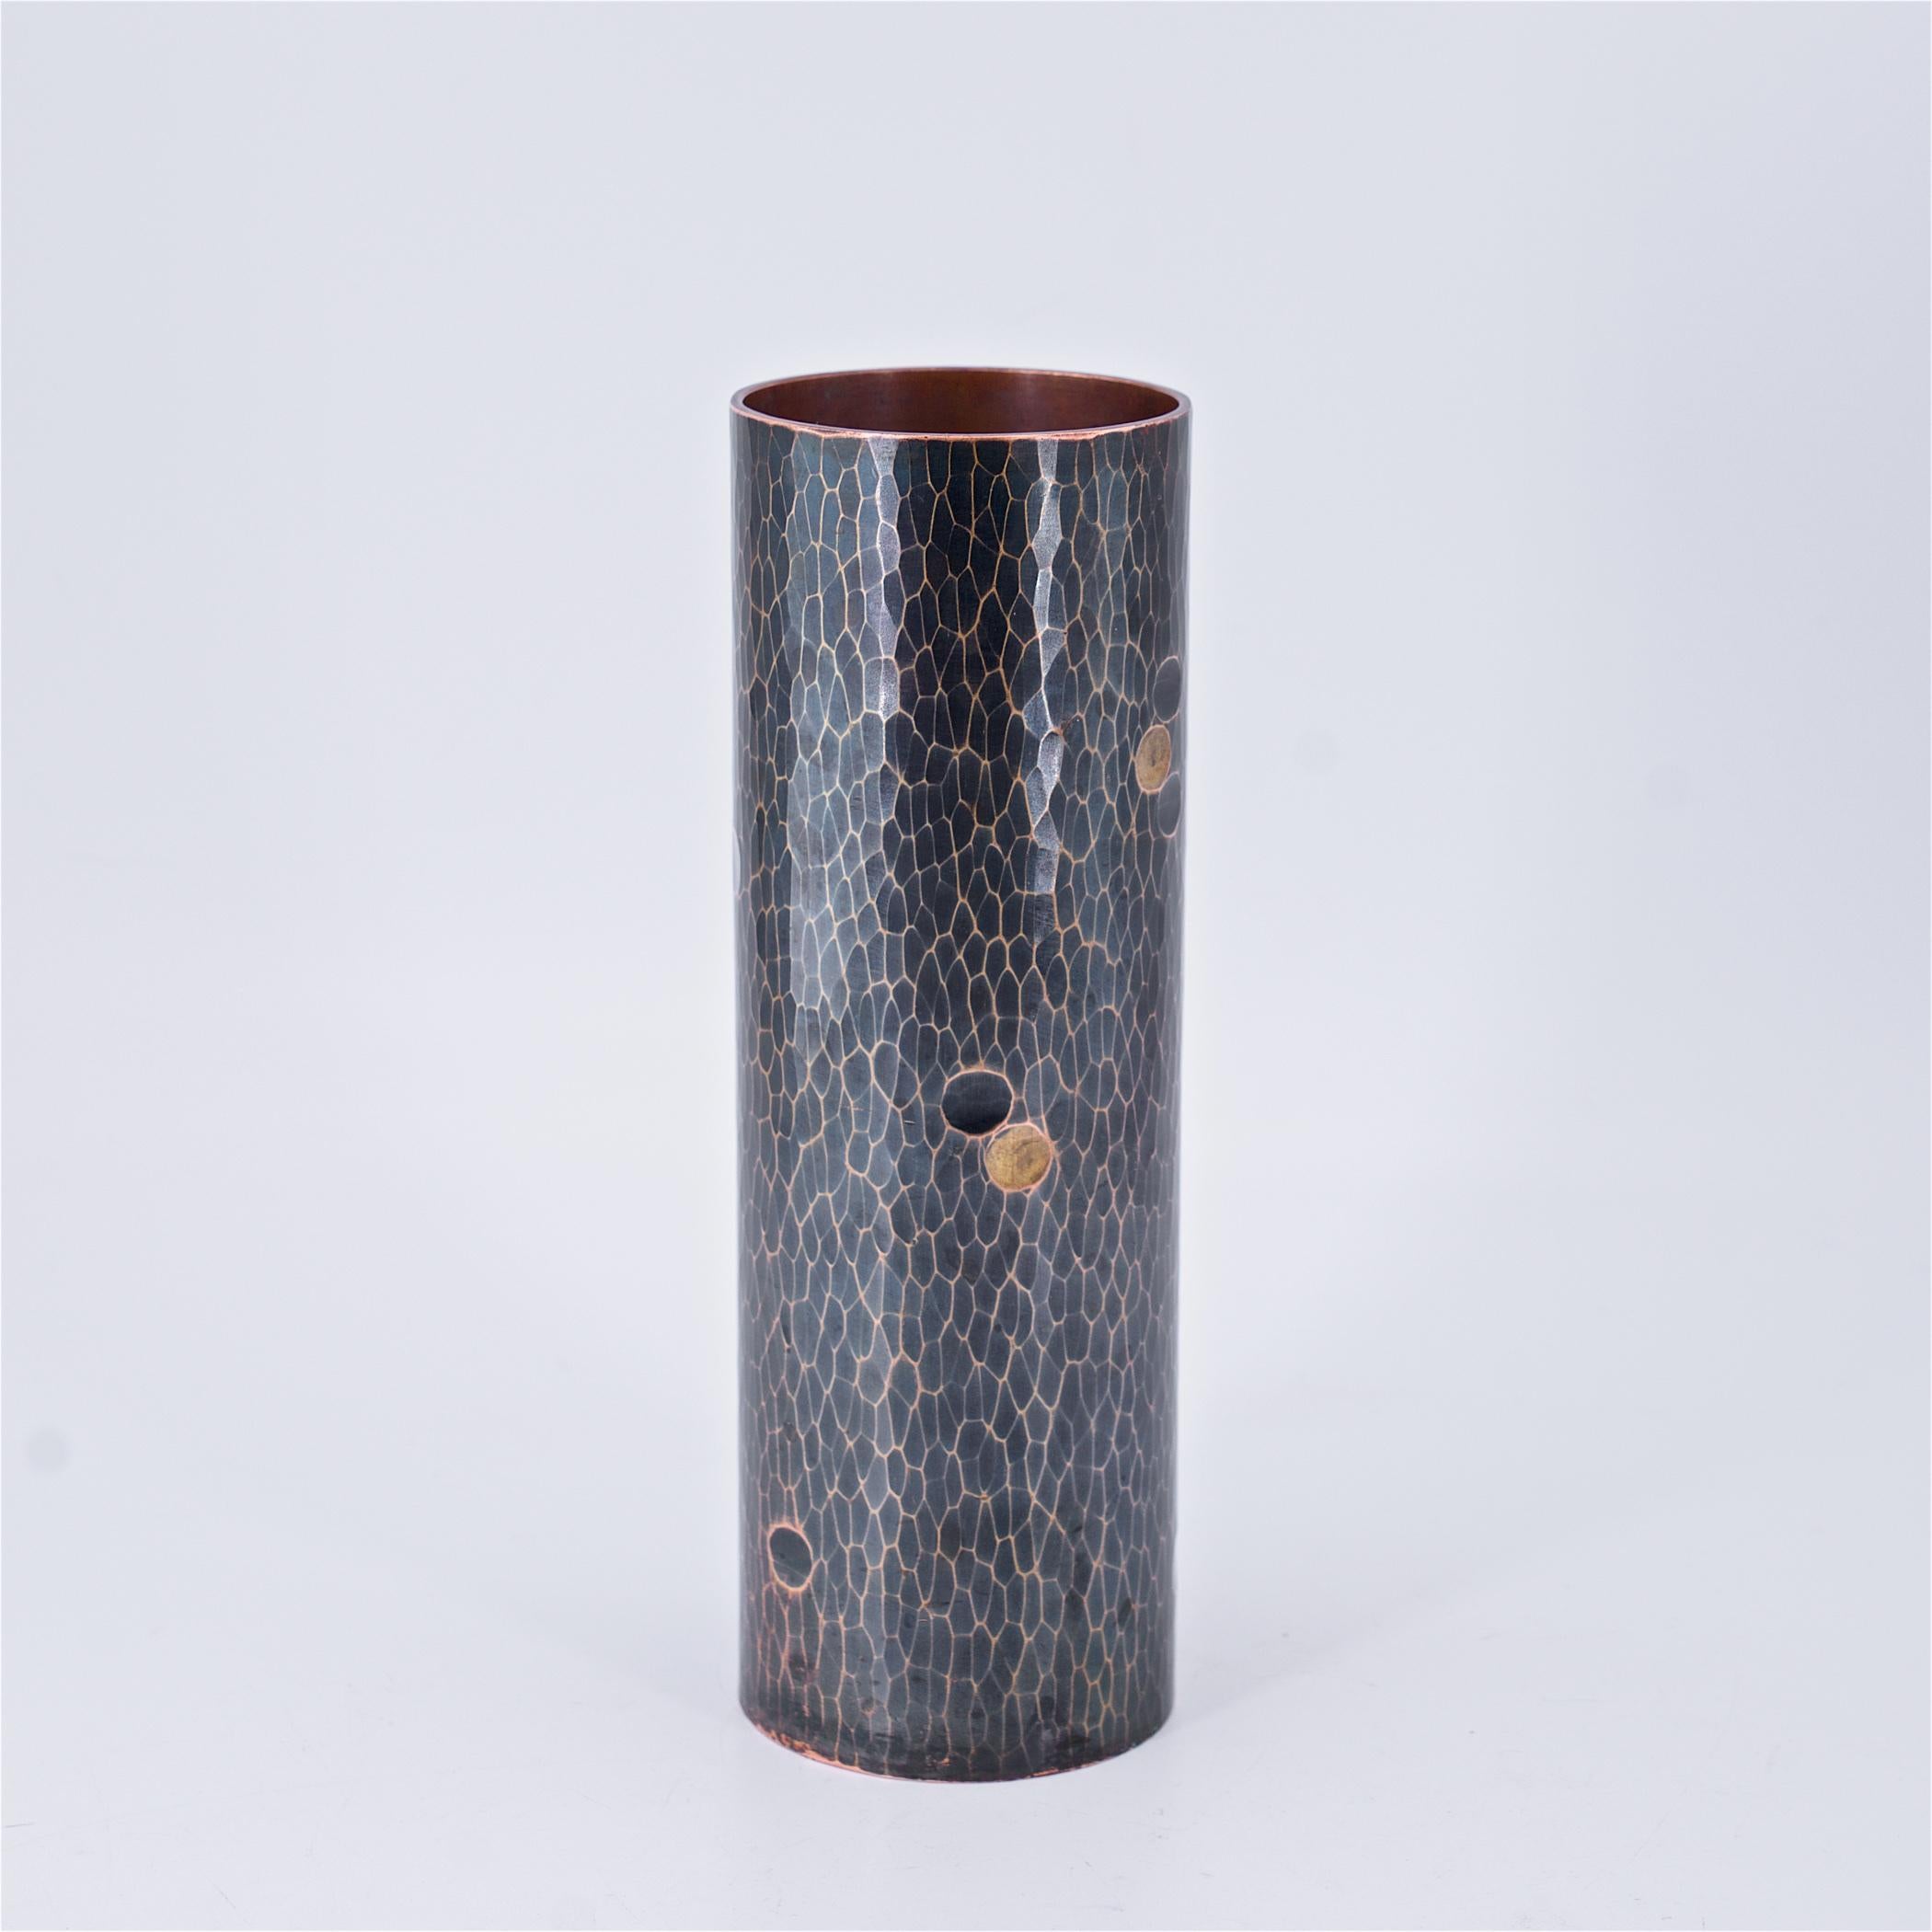 A fine vintage mid-century Japanese bronze and brass cylinder vase with a Martelé finish. Black patinated surface, polished ridges, and brass inlaid dots. Impressed maker’s mark on verso; wealth, nobility, and logotype with symbols of water and